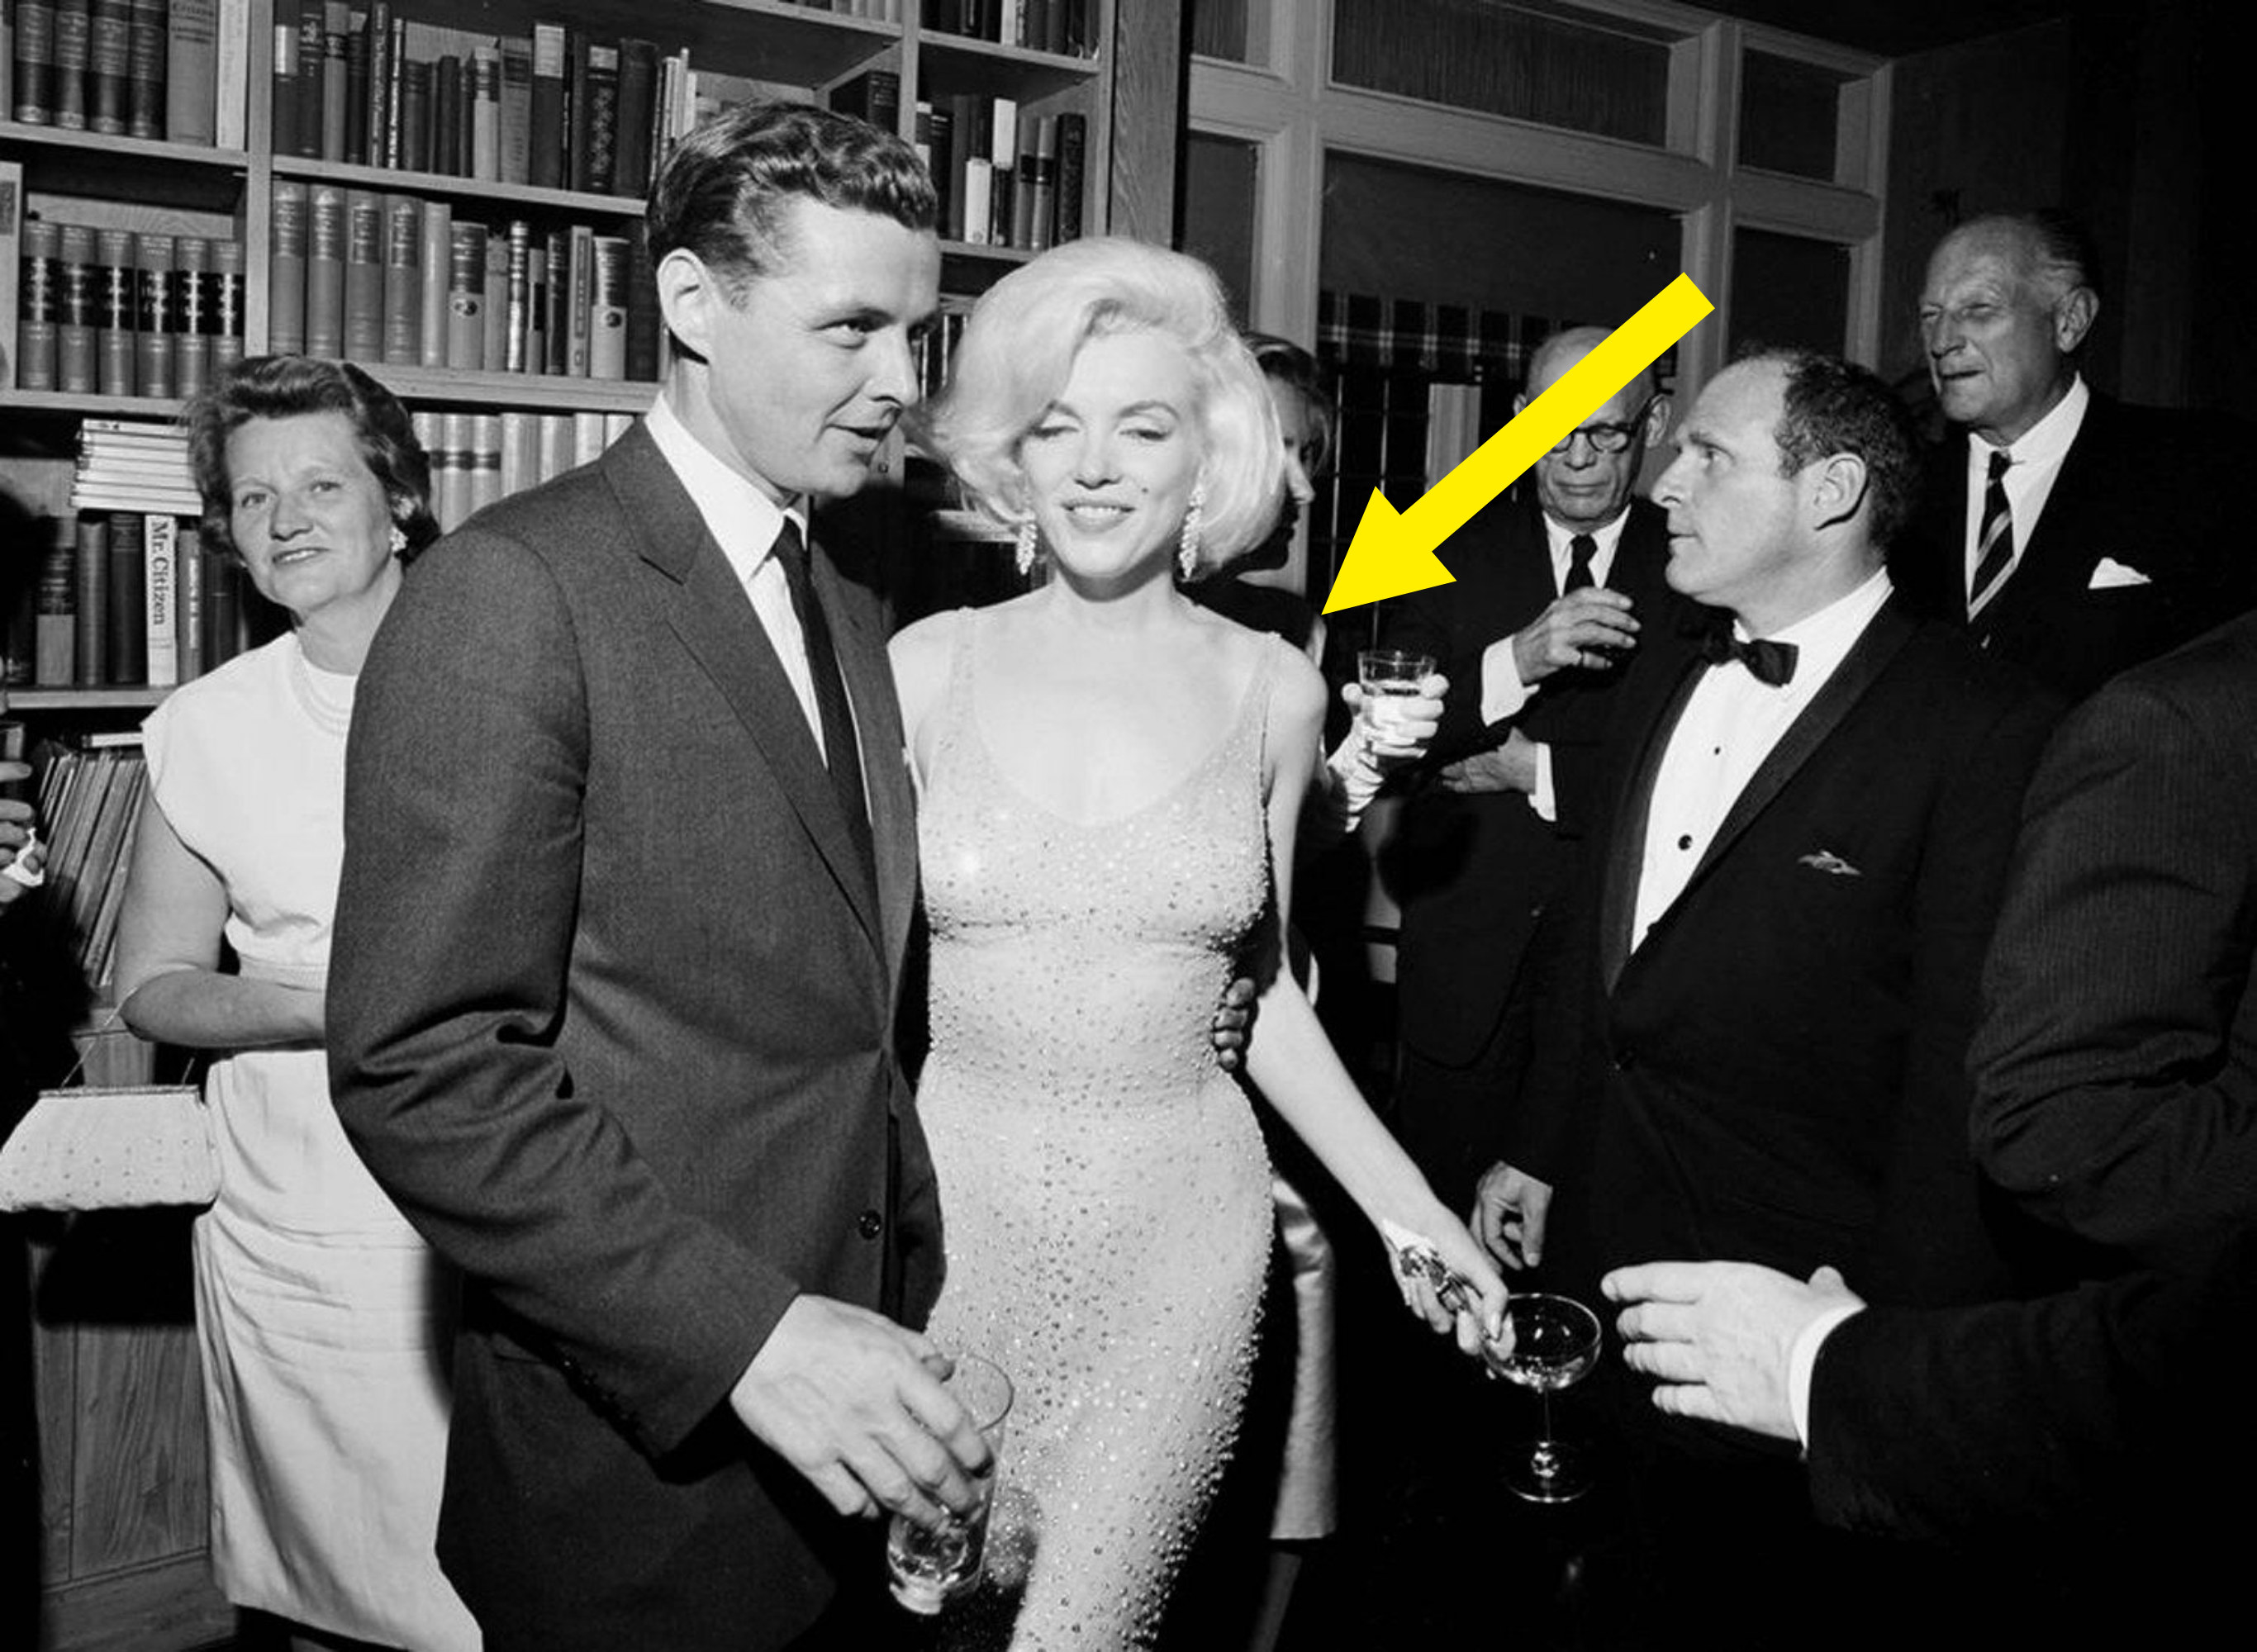 Marilyn Monroe wearing the dress and smiling amongst a group of people